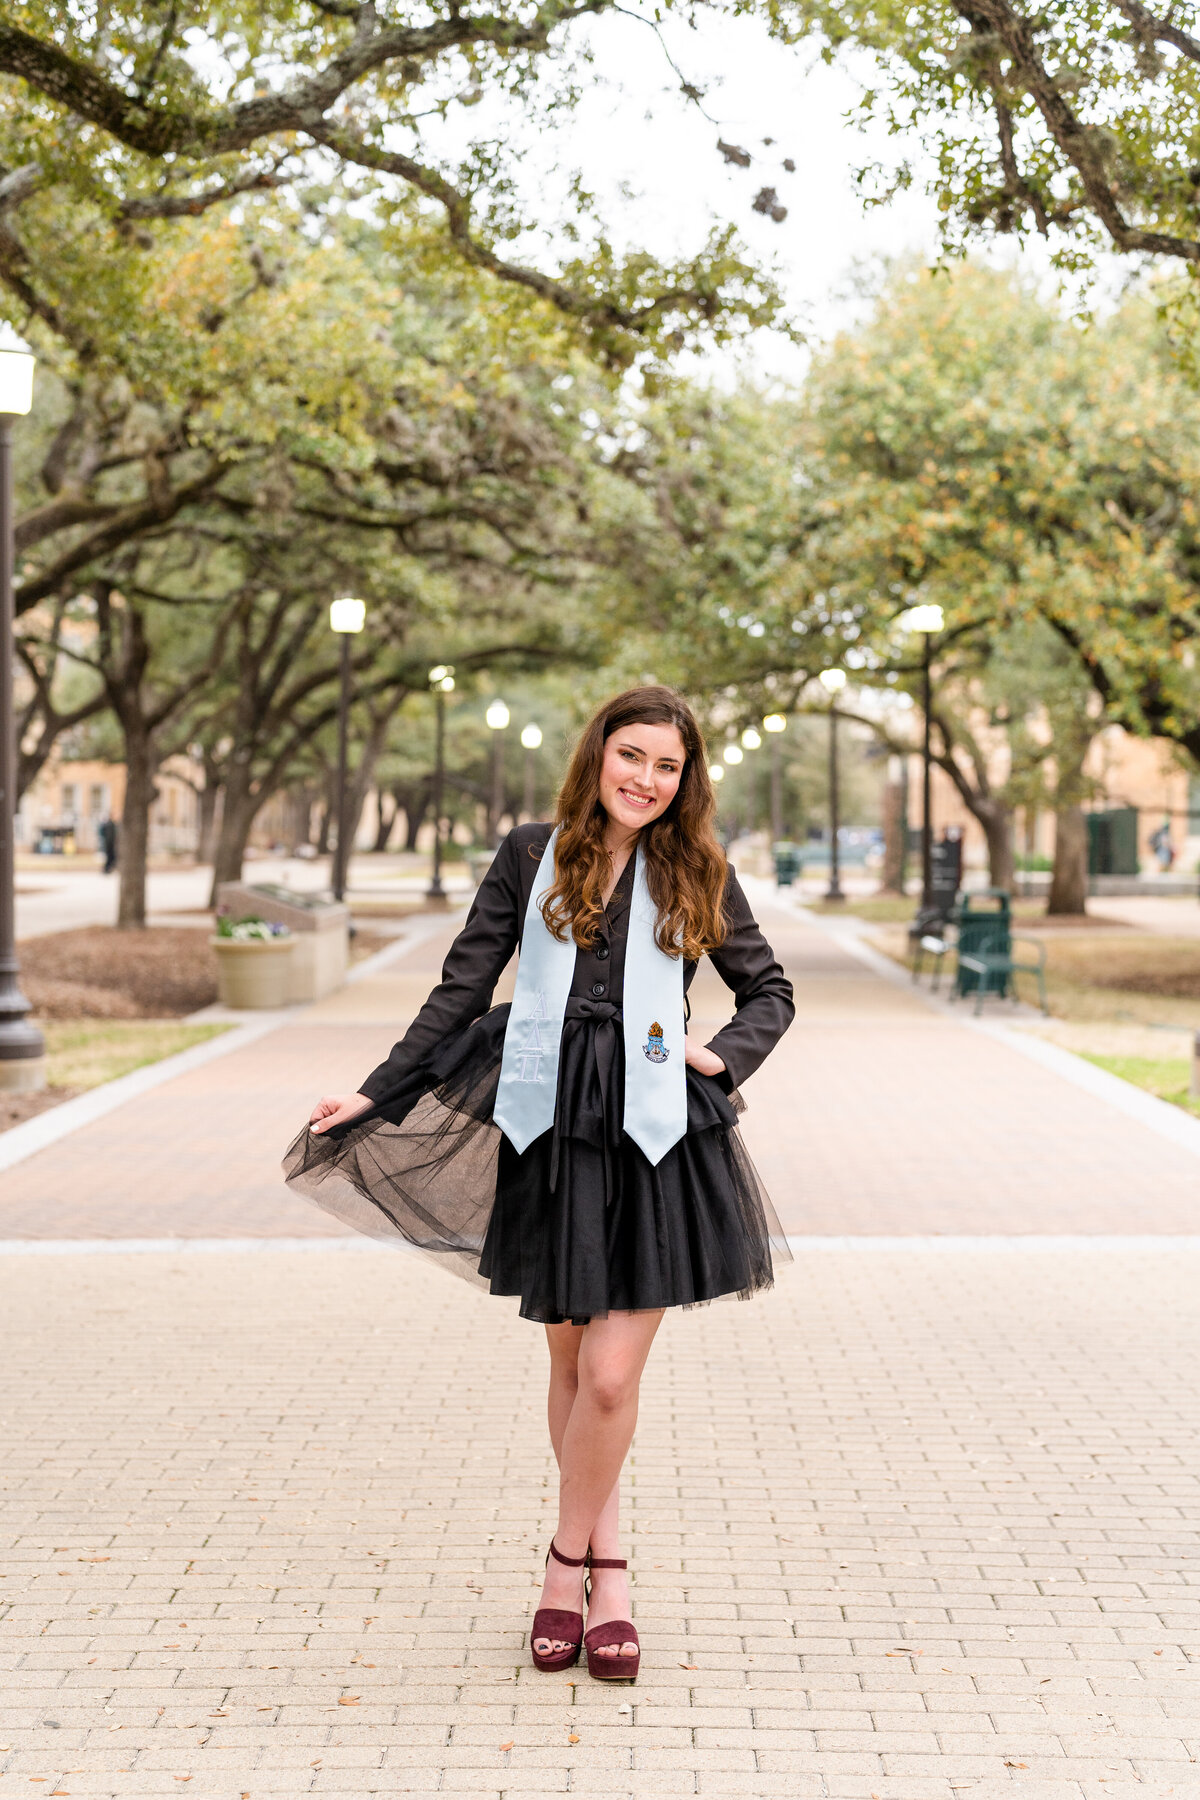 Texas A&M senior girl fluffling black dress and smiling while wearing Pi Phi stole in Military Plaza